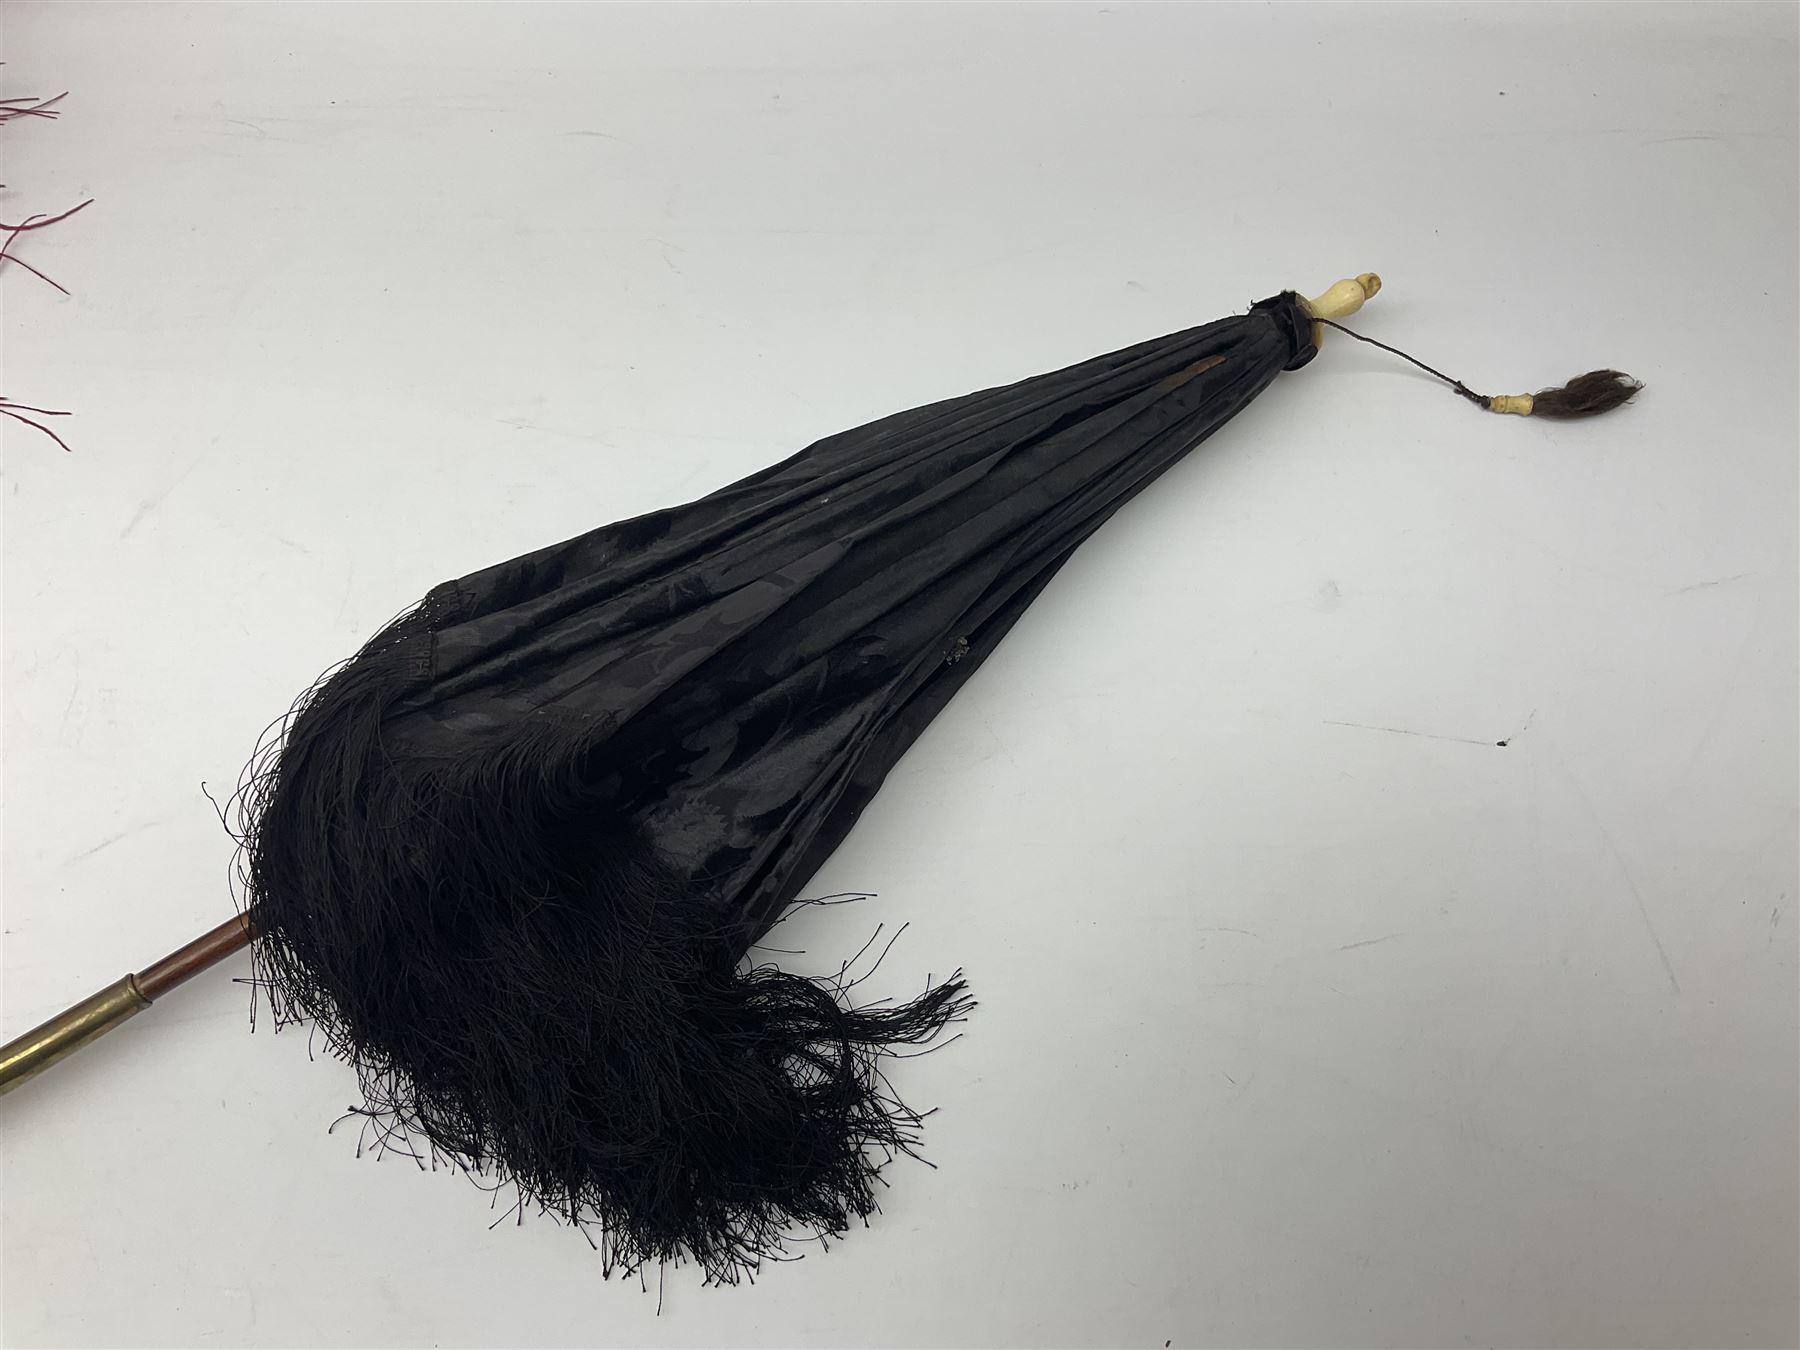 Victorian silk mourning parasol with a collapsible wooden handle - Image 2 of 19